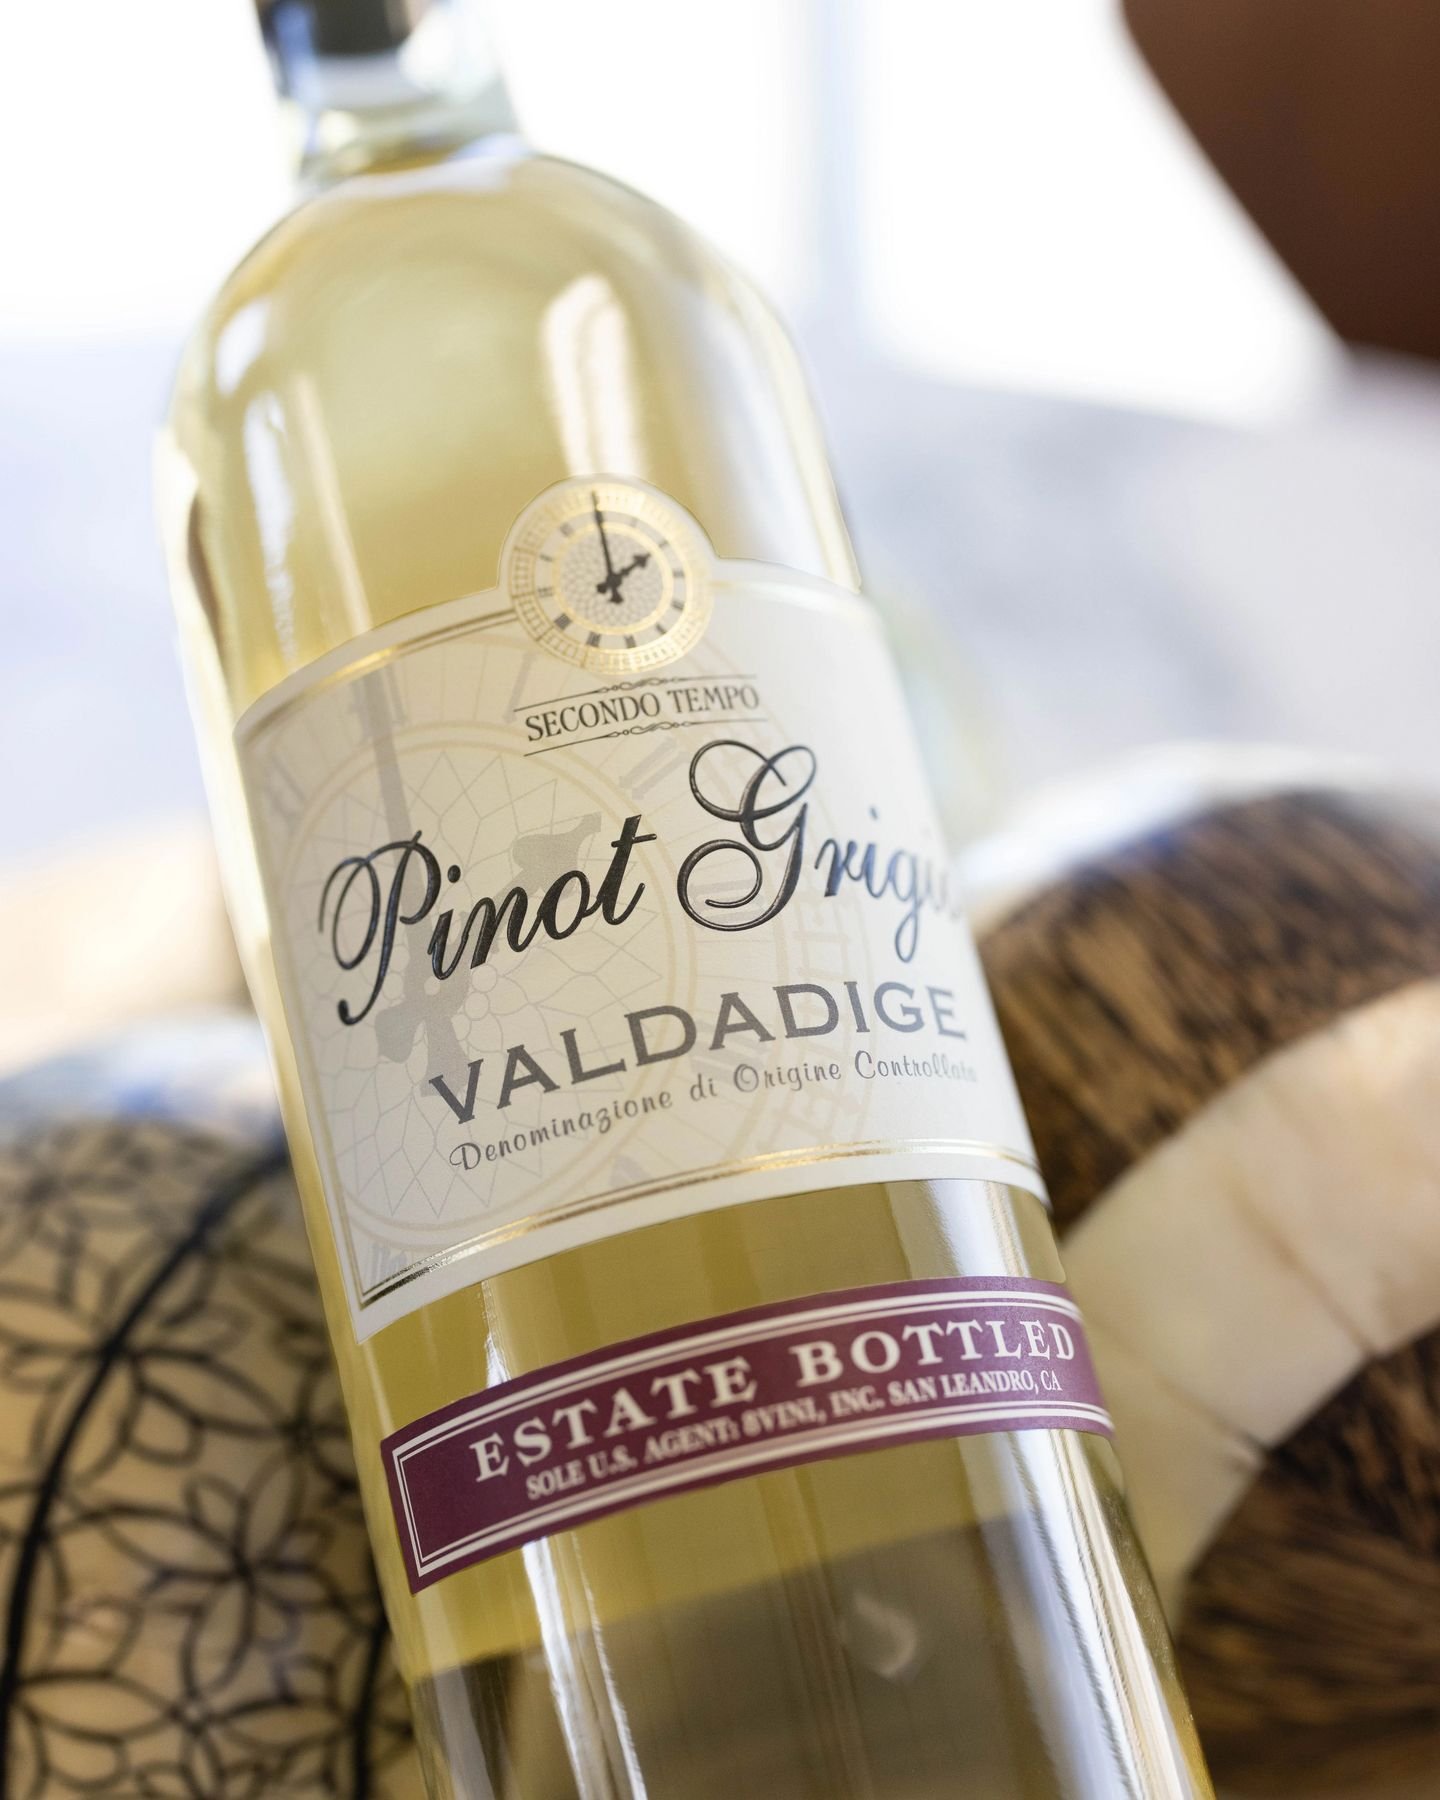 🍷 Ever wonder why a Secondo Tempo Pinot Grigio tastes so unique? Thanks to the crisp, citrusy aroma that precedes an intriguing blend of aniseed-coated apples, lemons, and pear flavors, it allows you to savor each sip. 
 
🍝 This complexity gives it